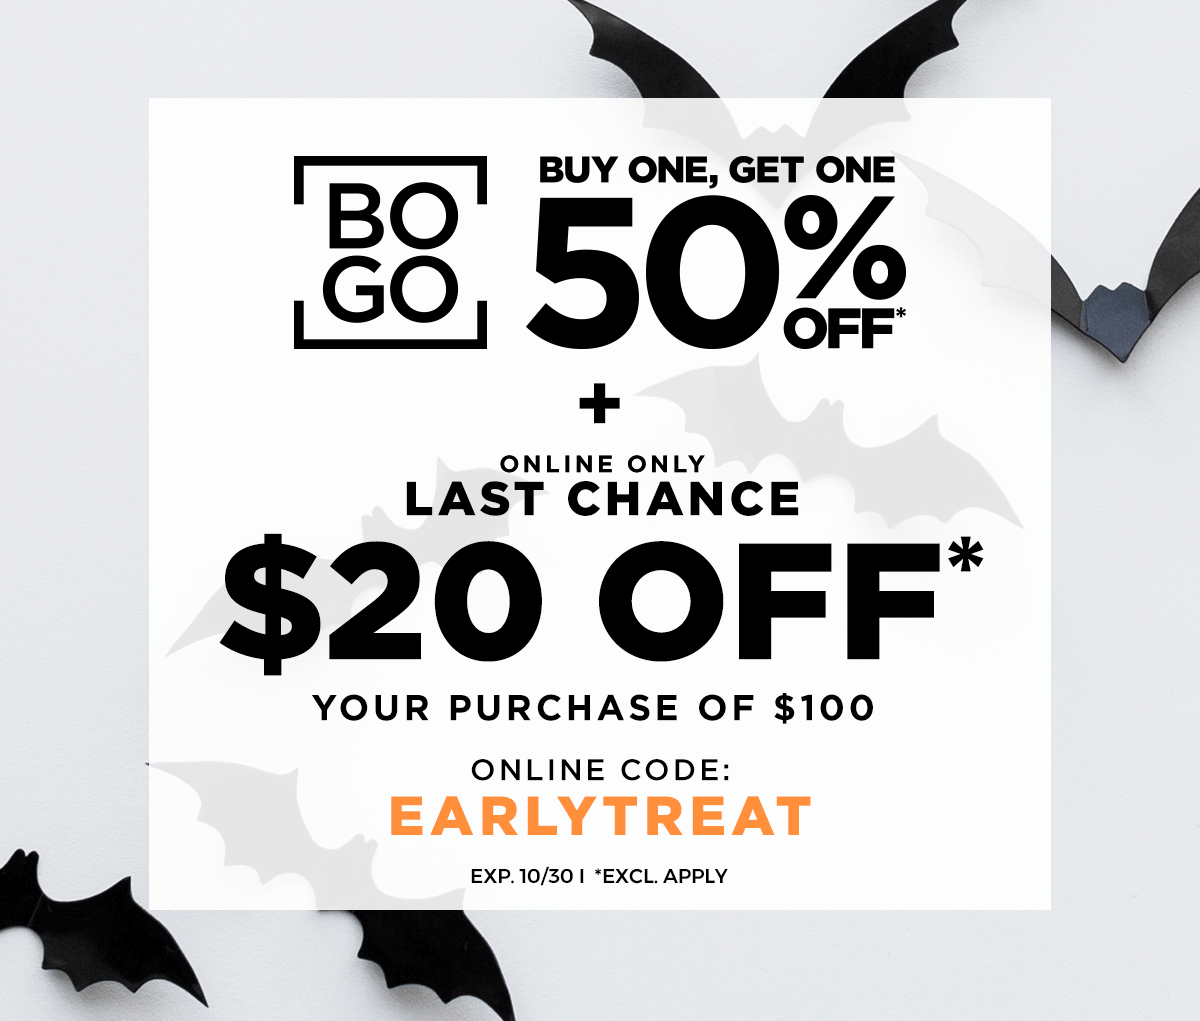 BUY ONE, GET ONE 50% OFF* ONLINE ONLY LAST CHANCE FLASH SALE \\$20 OFF* \\$100 ONLINE CODE: EARLYTREAT EXP. 10/30 *EXCL. APPLY